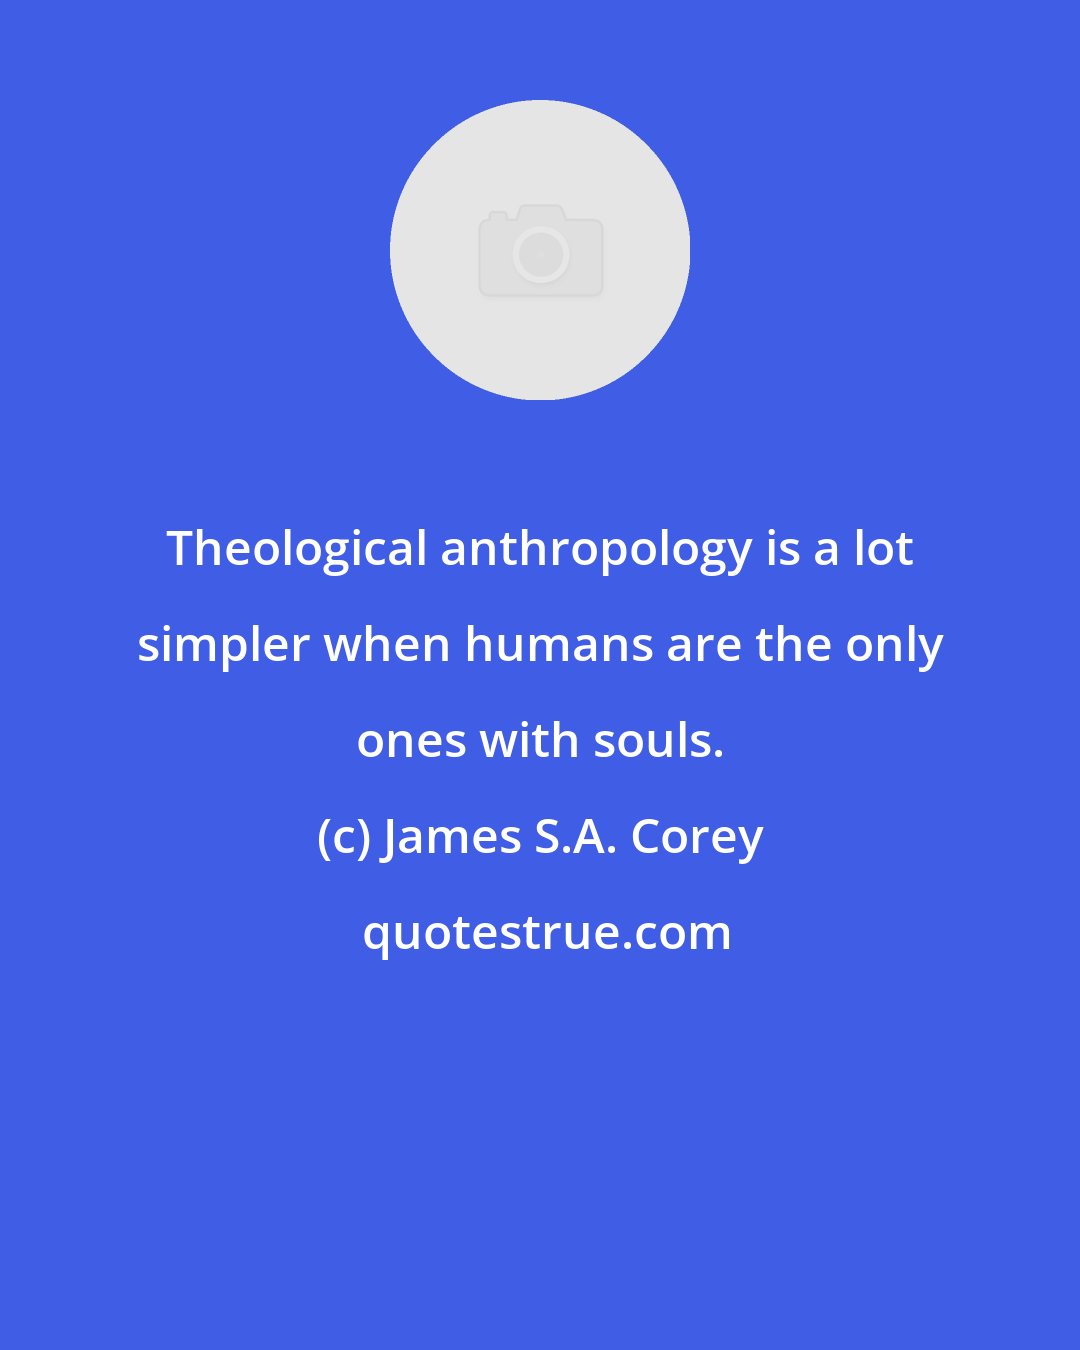 James S.A. Corey: Theological anthropology is a lot simpler when humans are the only ones with souls.